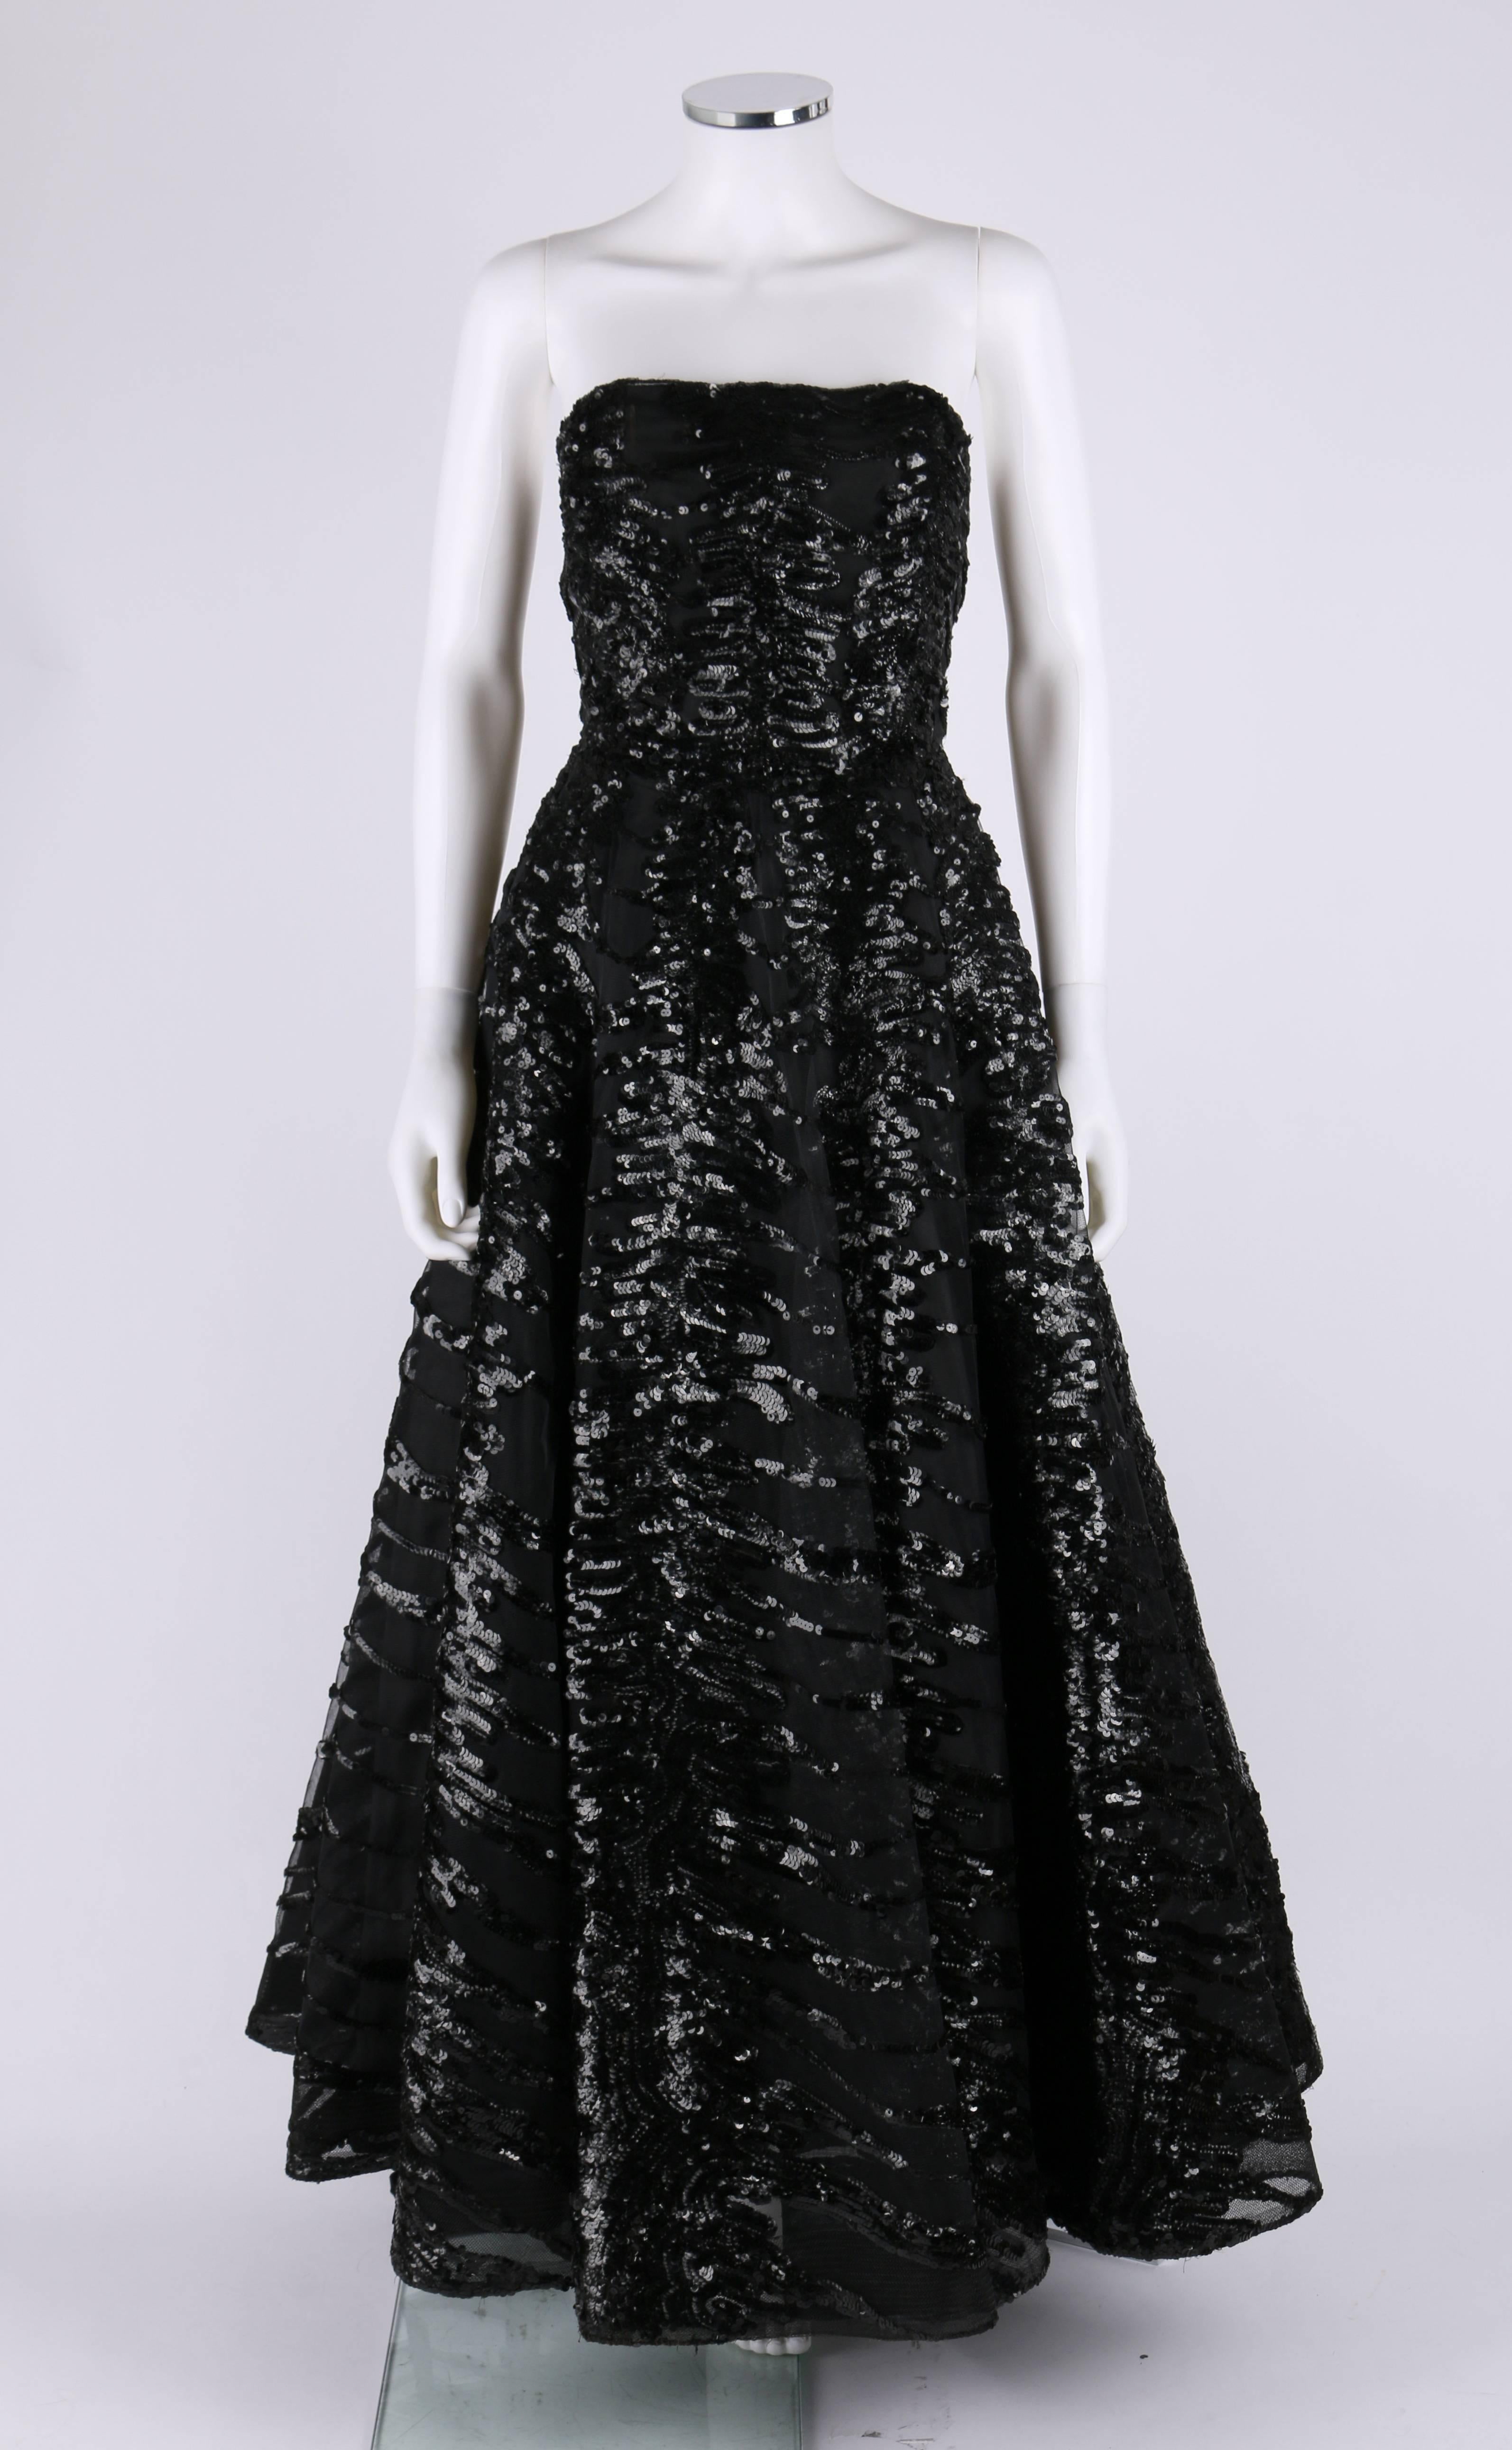 Amazing vintage ball gown custom made for 1950s opera singer Alberta Hopkins. Net overdress is heavily embellished with glossy and textured black sequins. Strapless bodice is boned and has an internal grosgrain ribbon waistband. The hemline of the